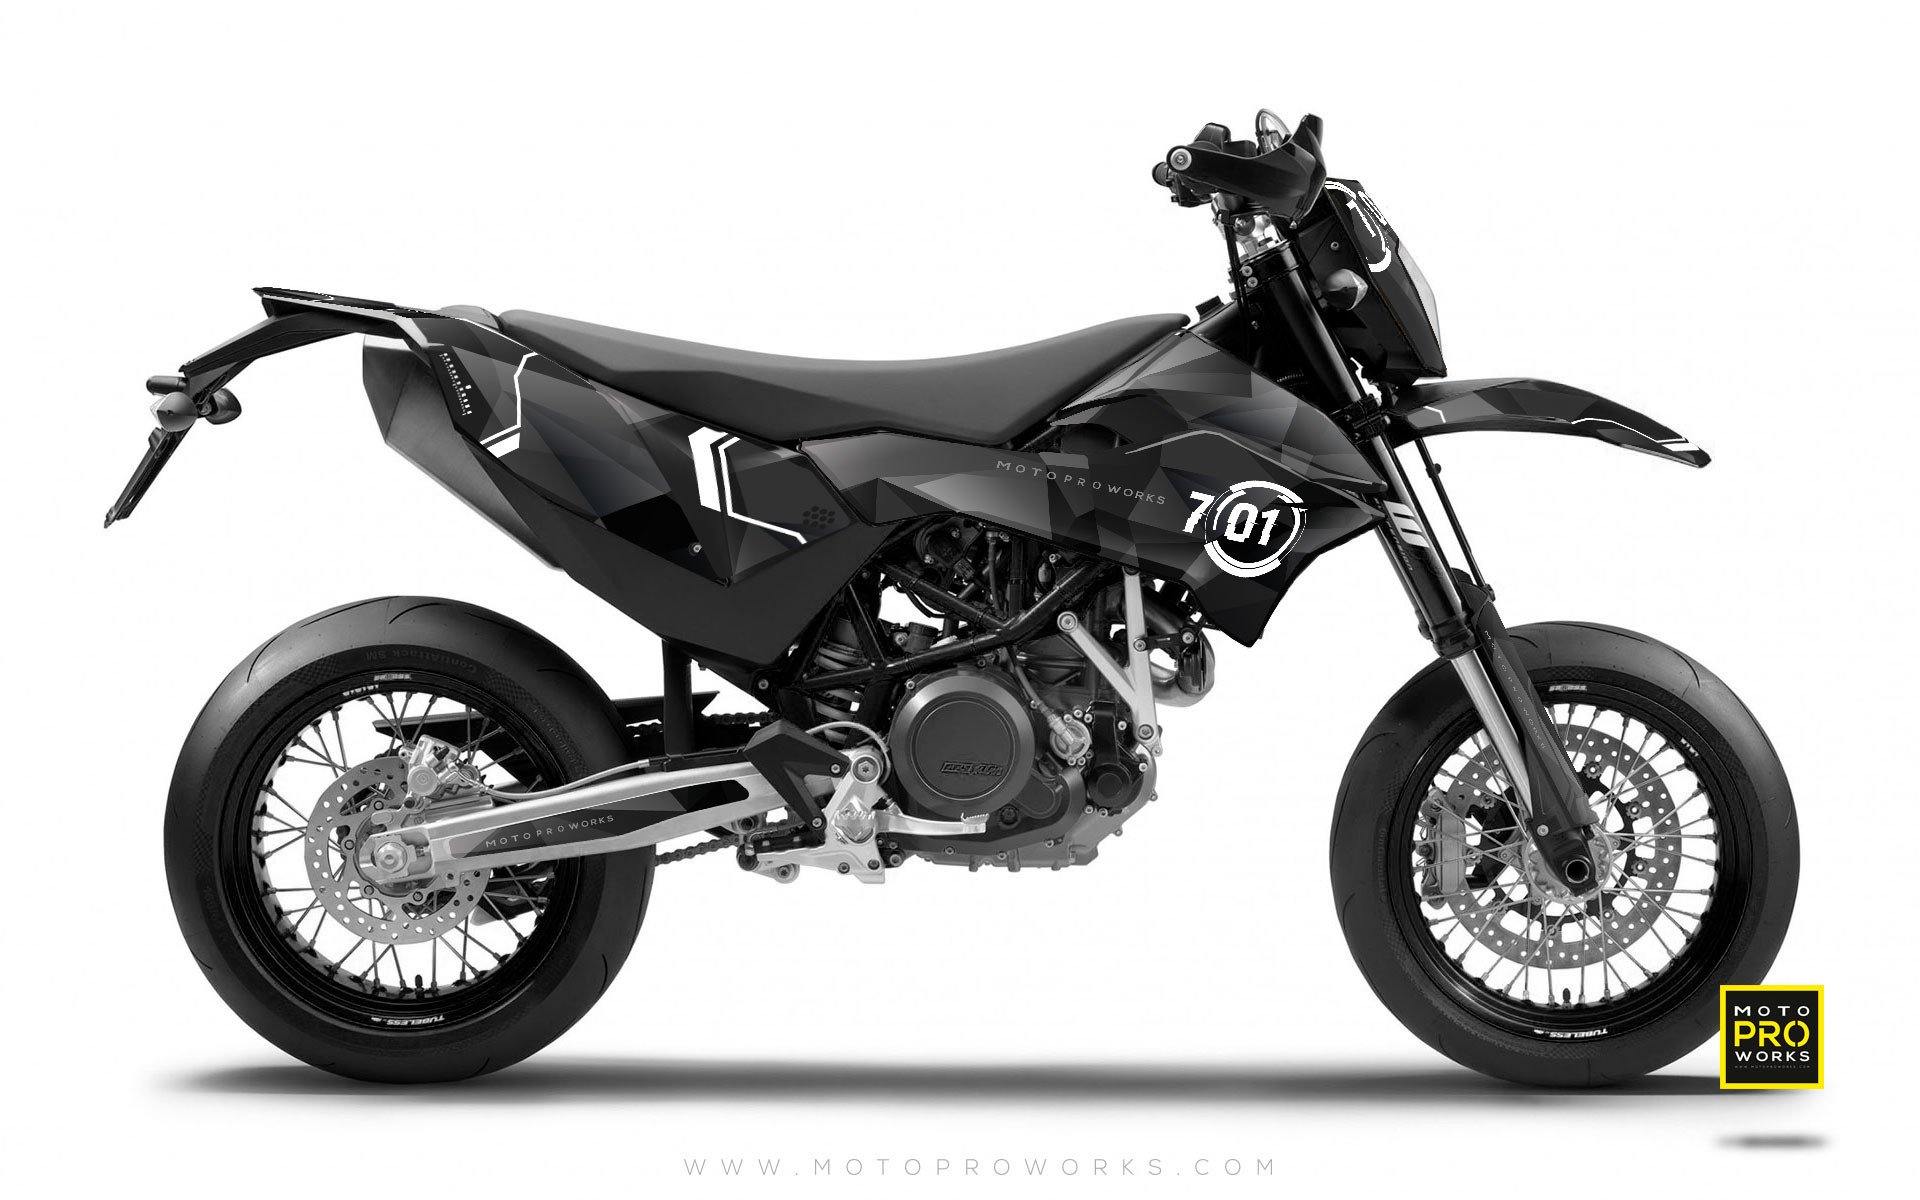 KTM GRAPHIC KIT - "SCANNER" - MotoProWorks | Decals and Bike Graphic kit